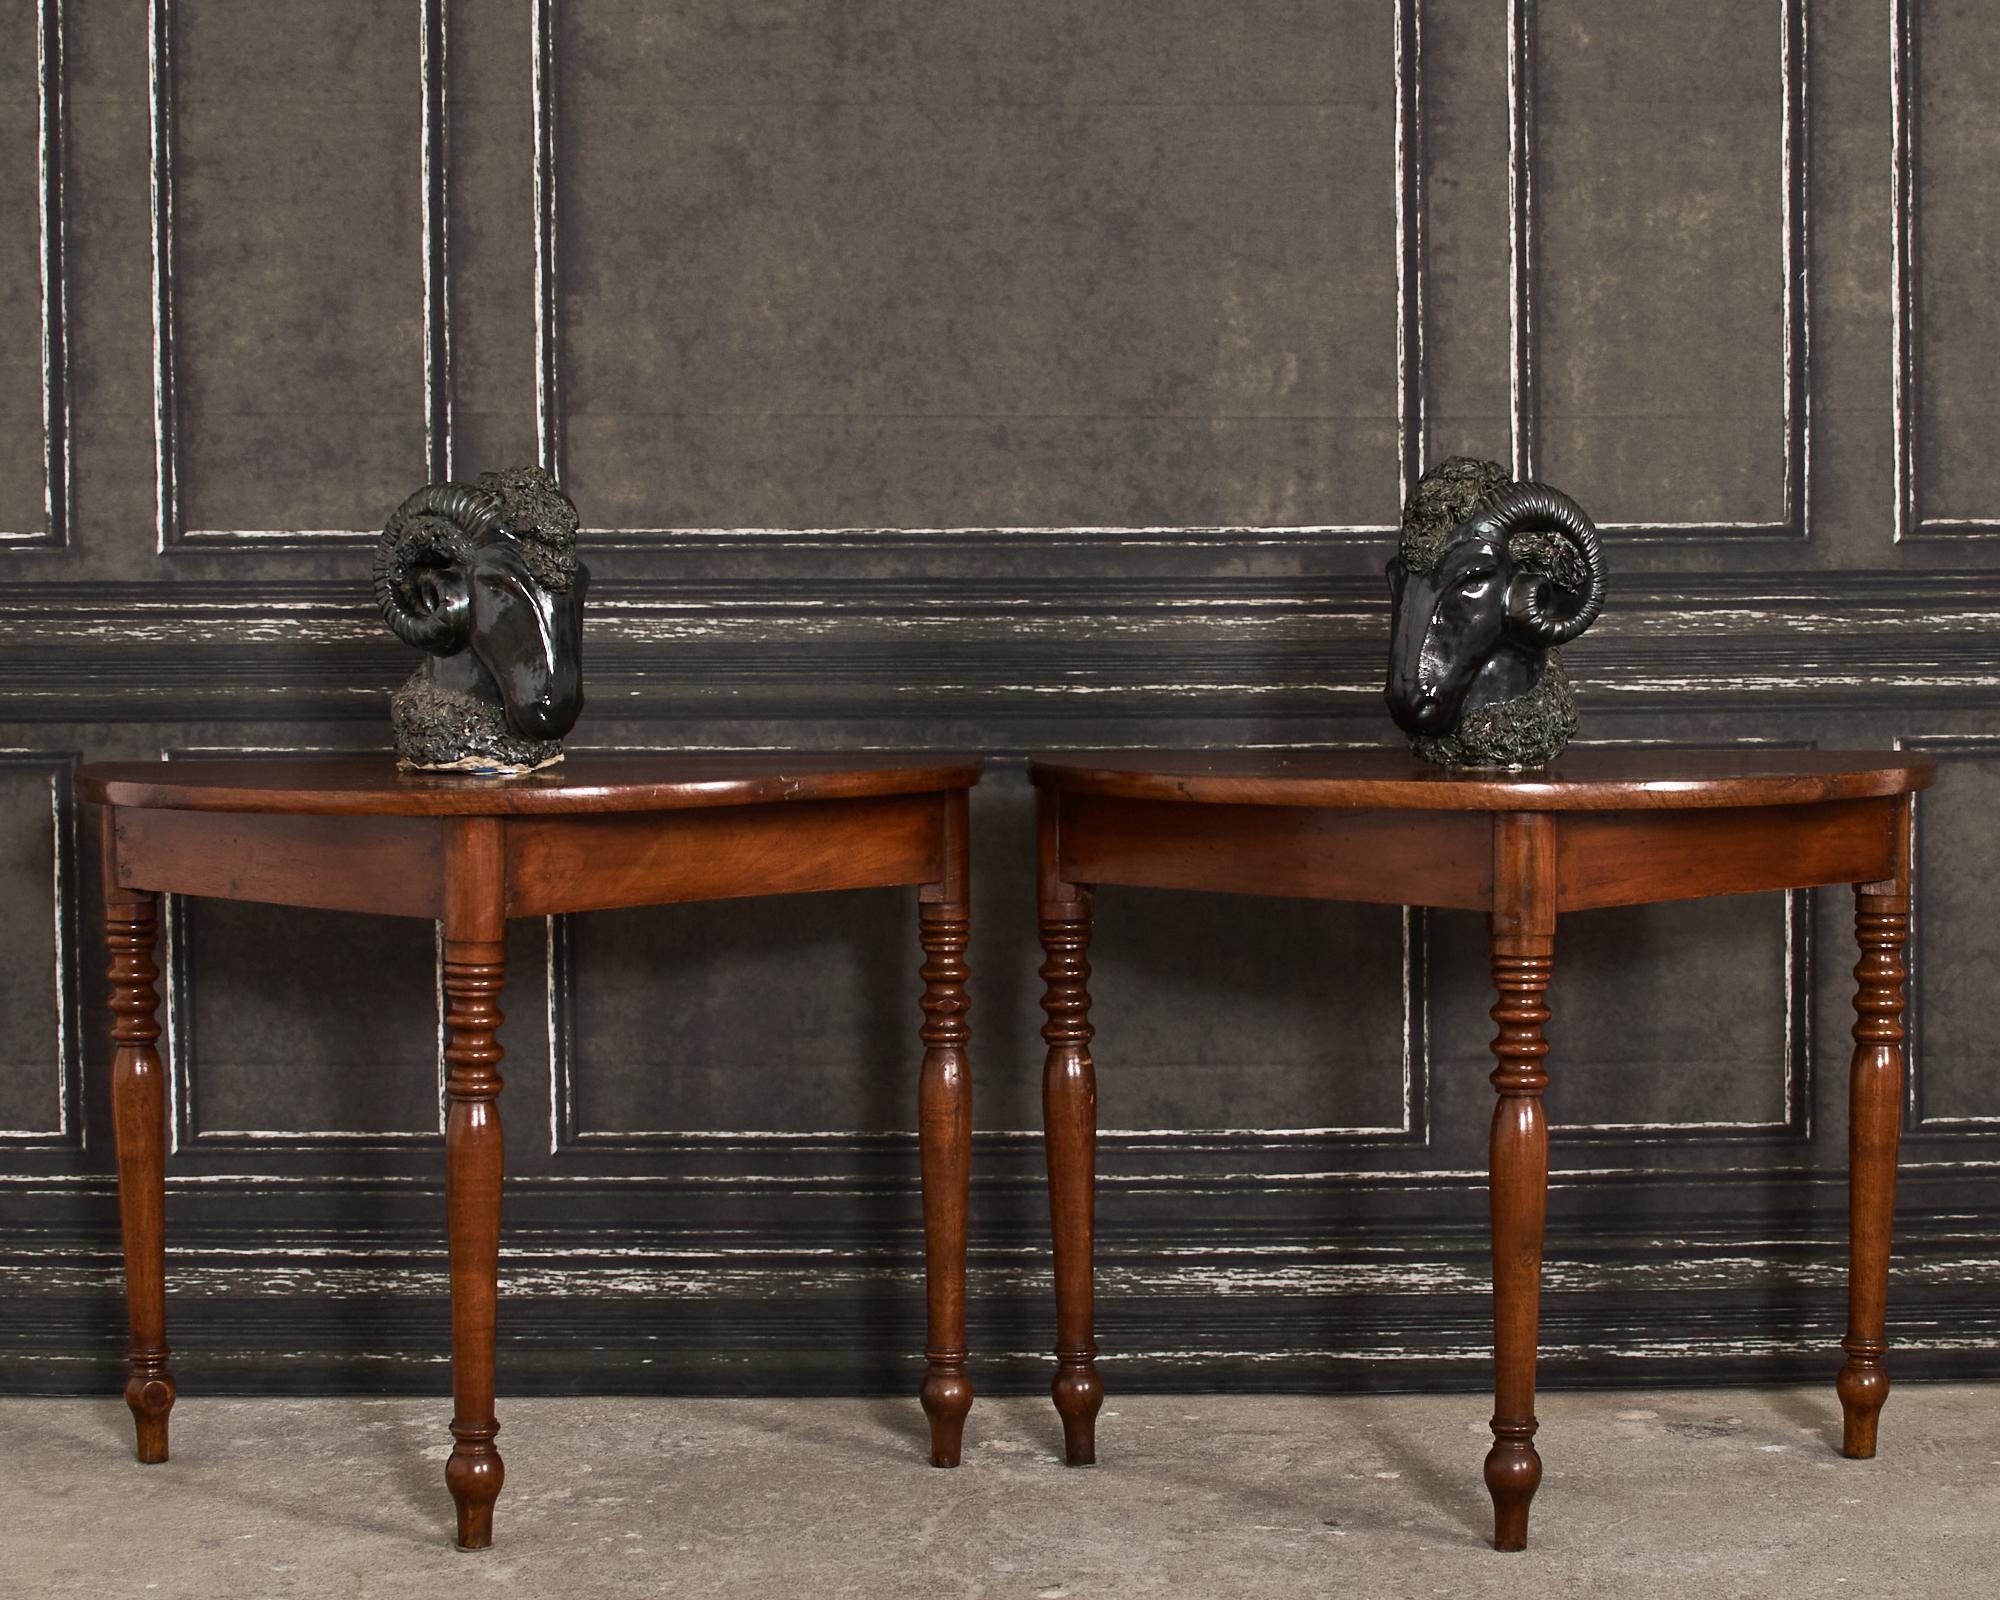 19th century gorgeous pair of country English provincial demi-lune console tables crafted from walnut. Constructed from wood dowel peg joinery having demilune shaped tops above triangular shaped aprons. Originally ends of a banquet table the pair